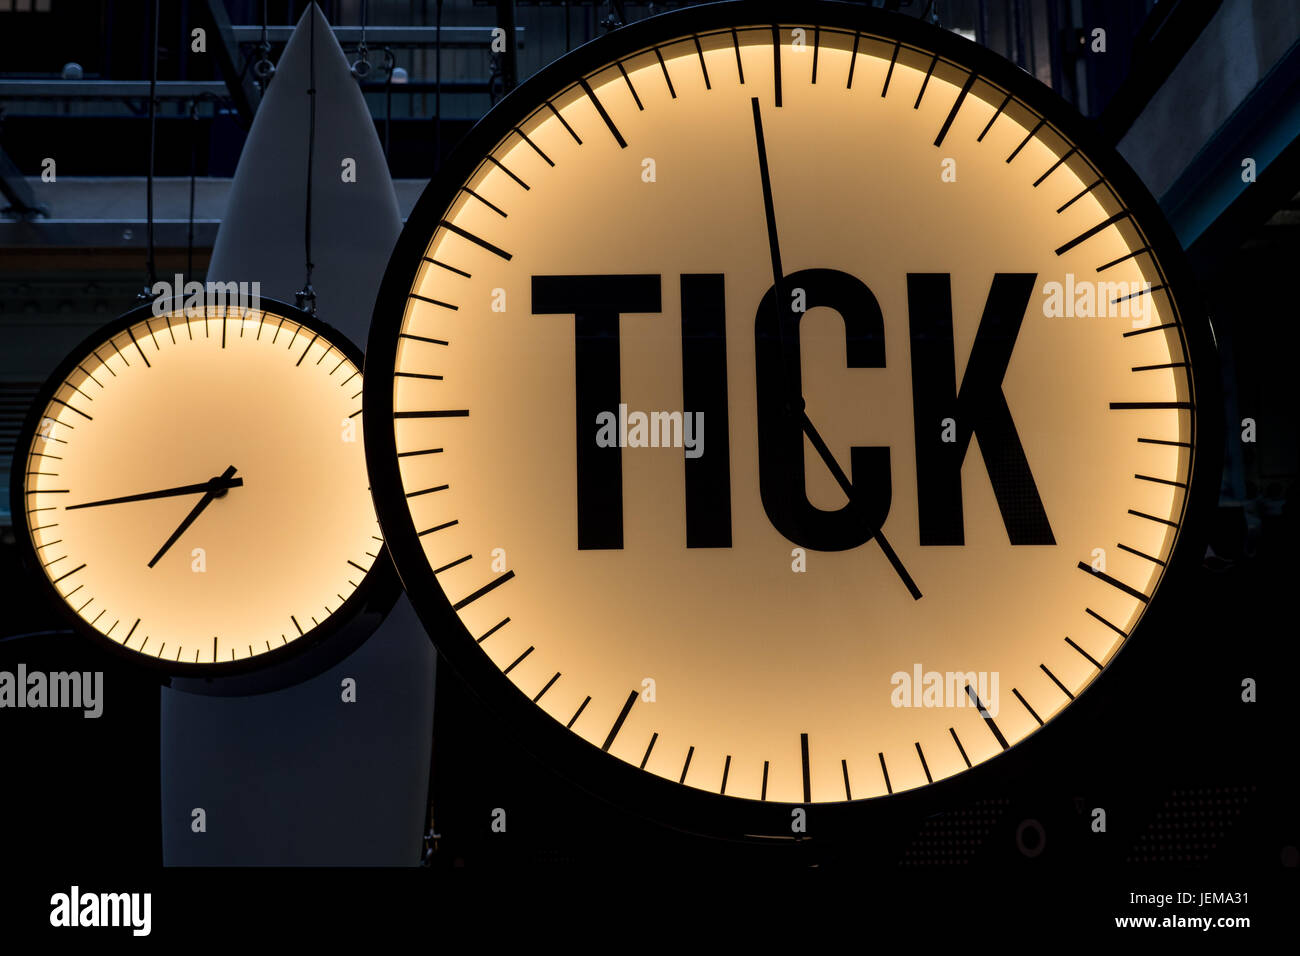 The word Tick on a clock face as made famous on one of the Guinness TV adverts. Stock Photo